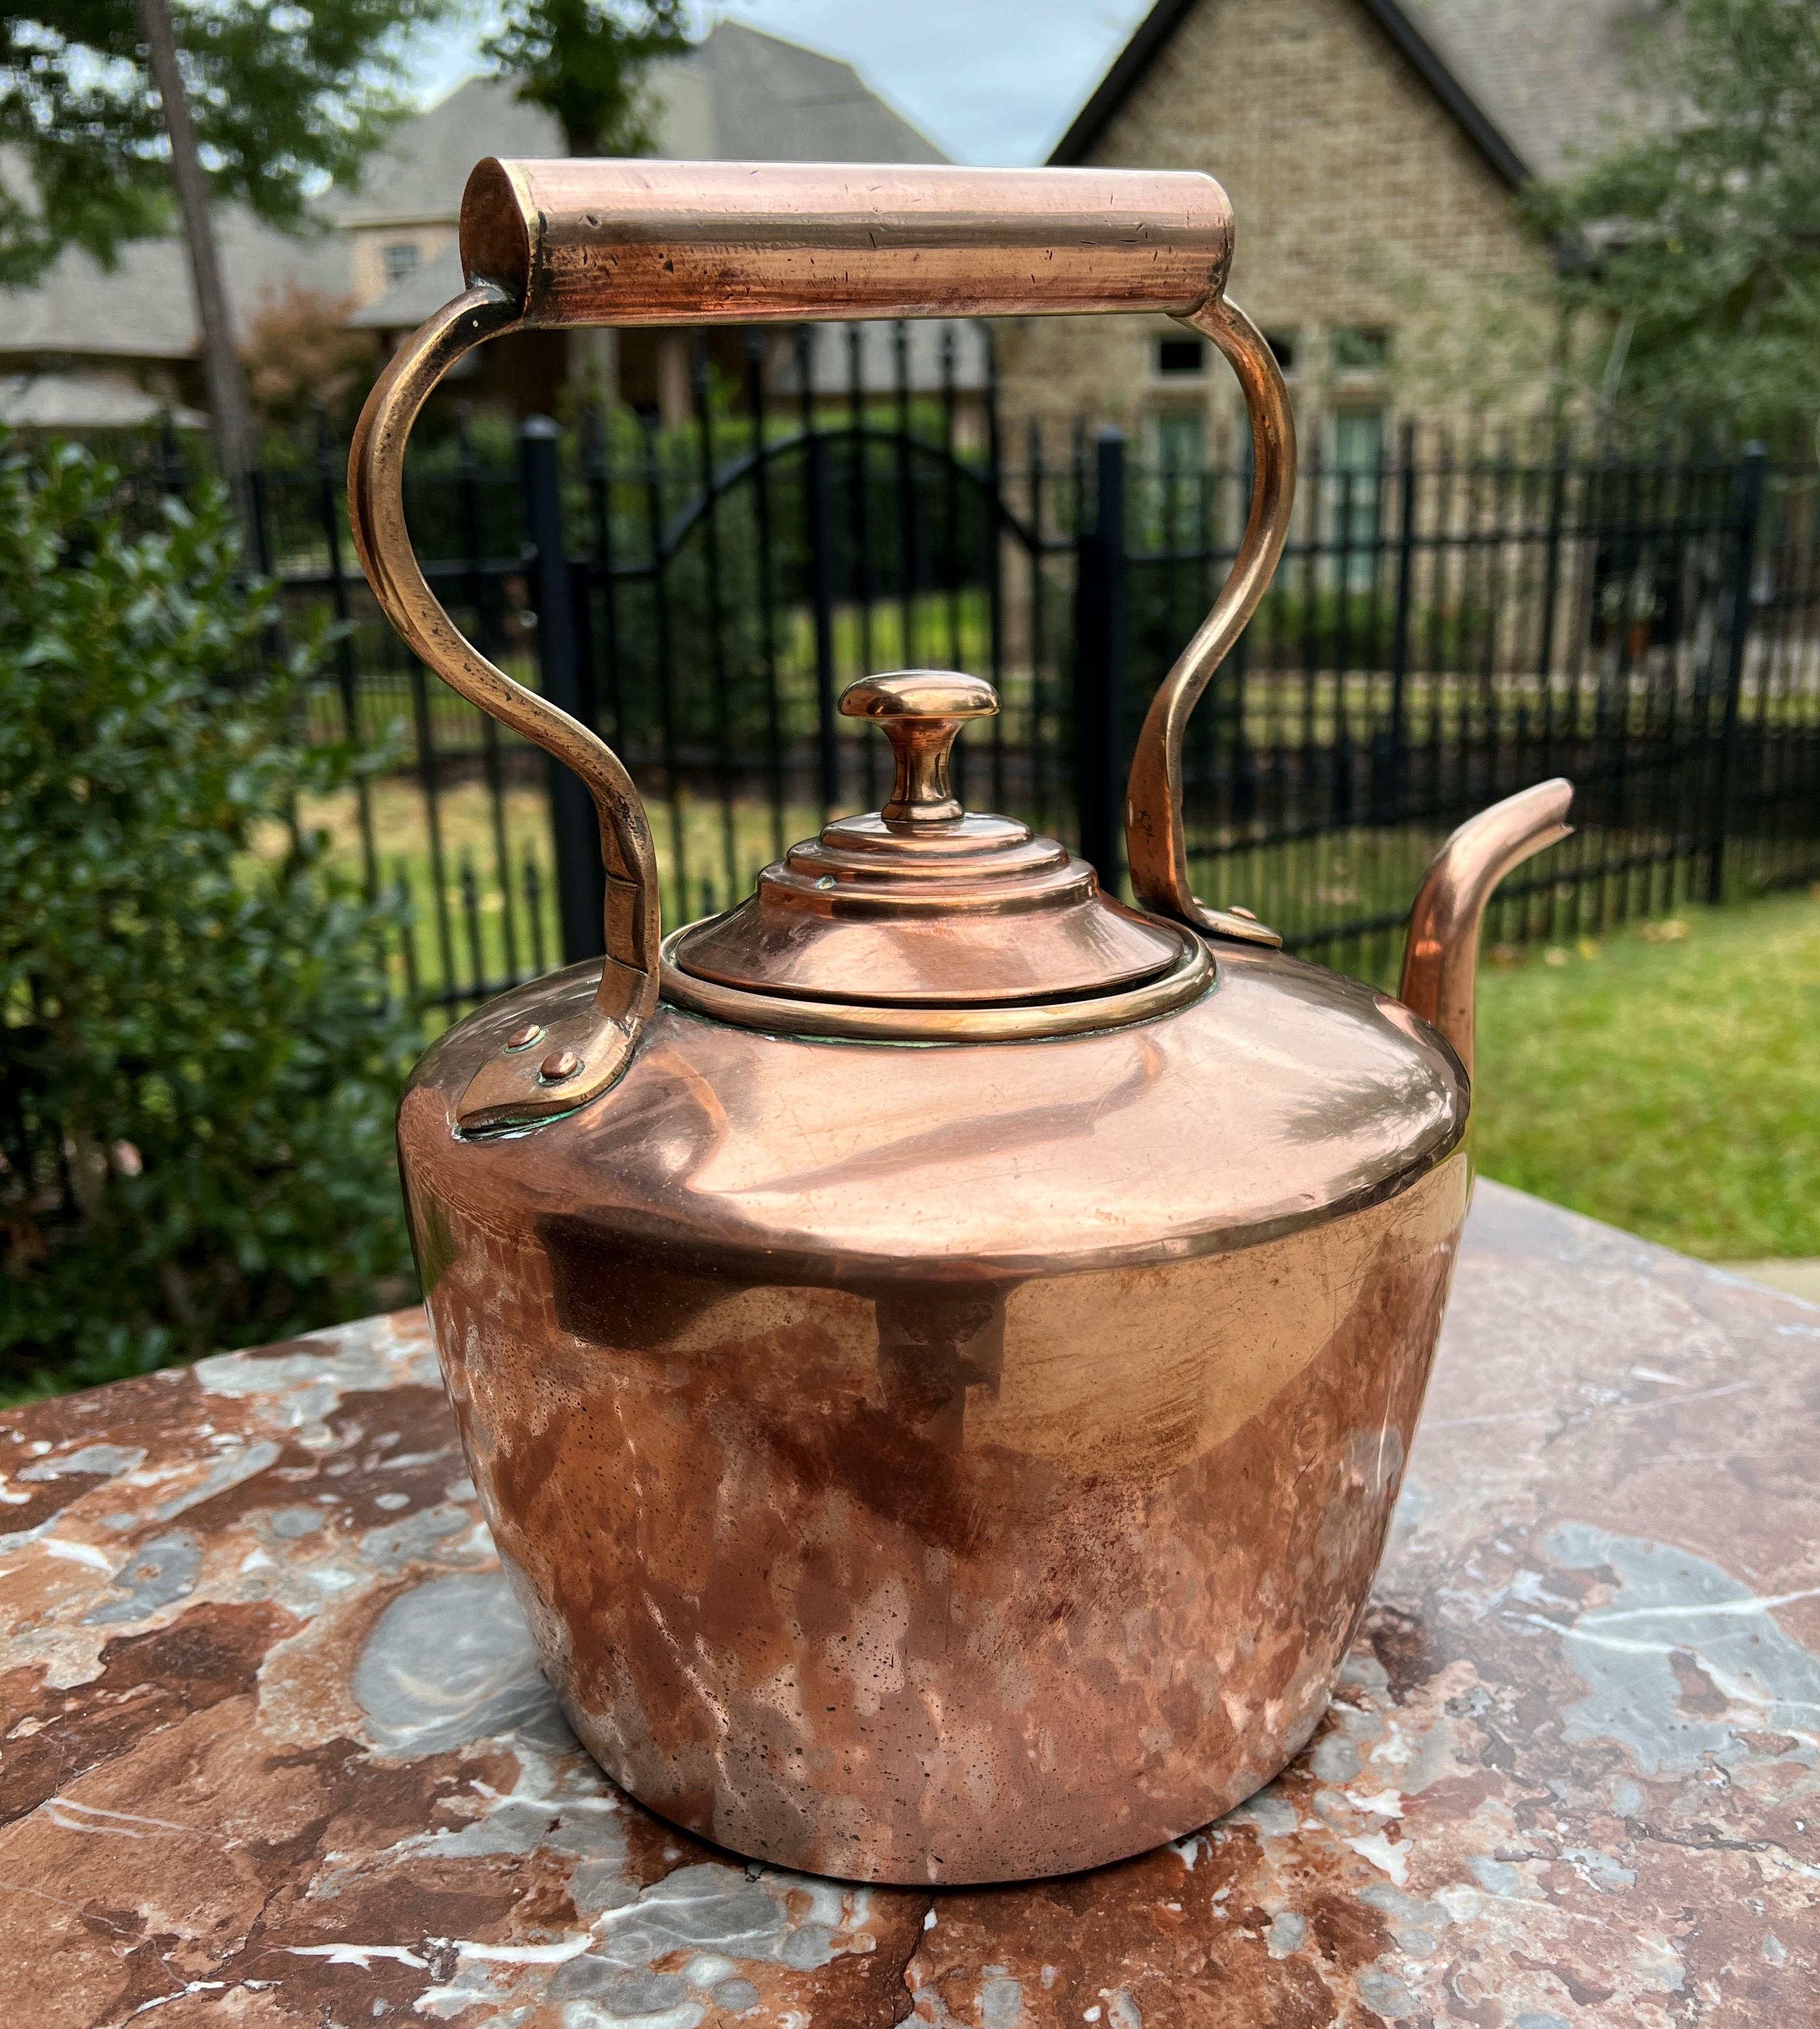 CHARMING Antique English Copper Tea or Coffee Kettle with Pour Spout, Lid with Round Knob, and Copper Handle #2~~c. 1900.

Fresh polish

 Measures: 12